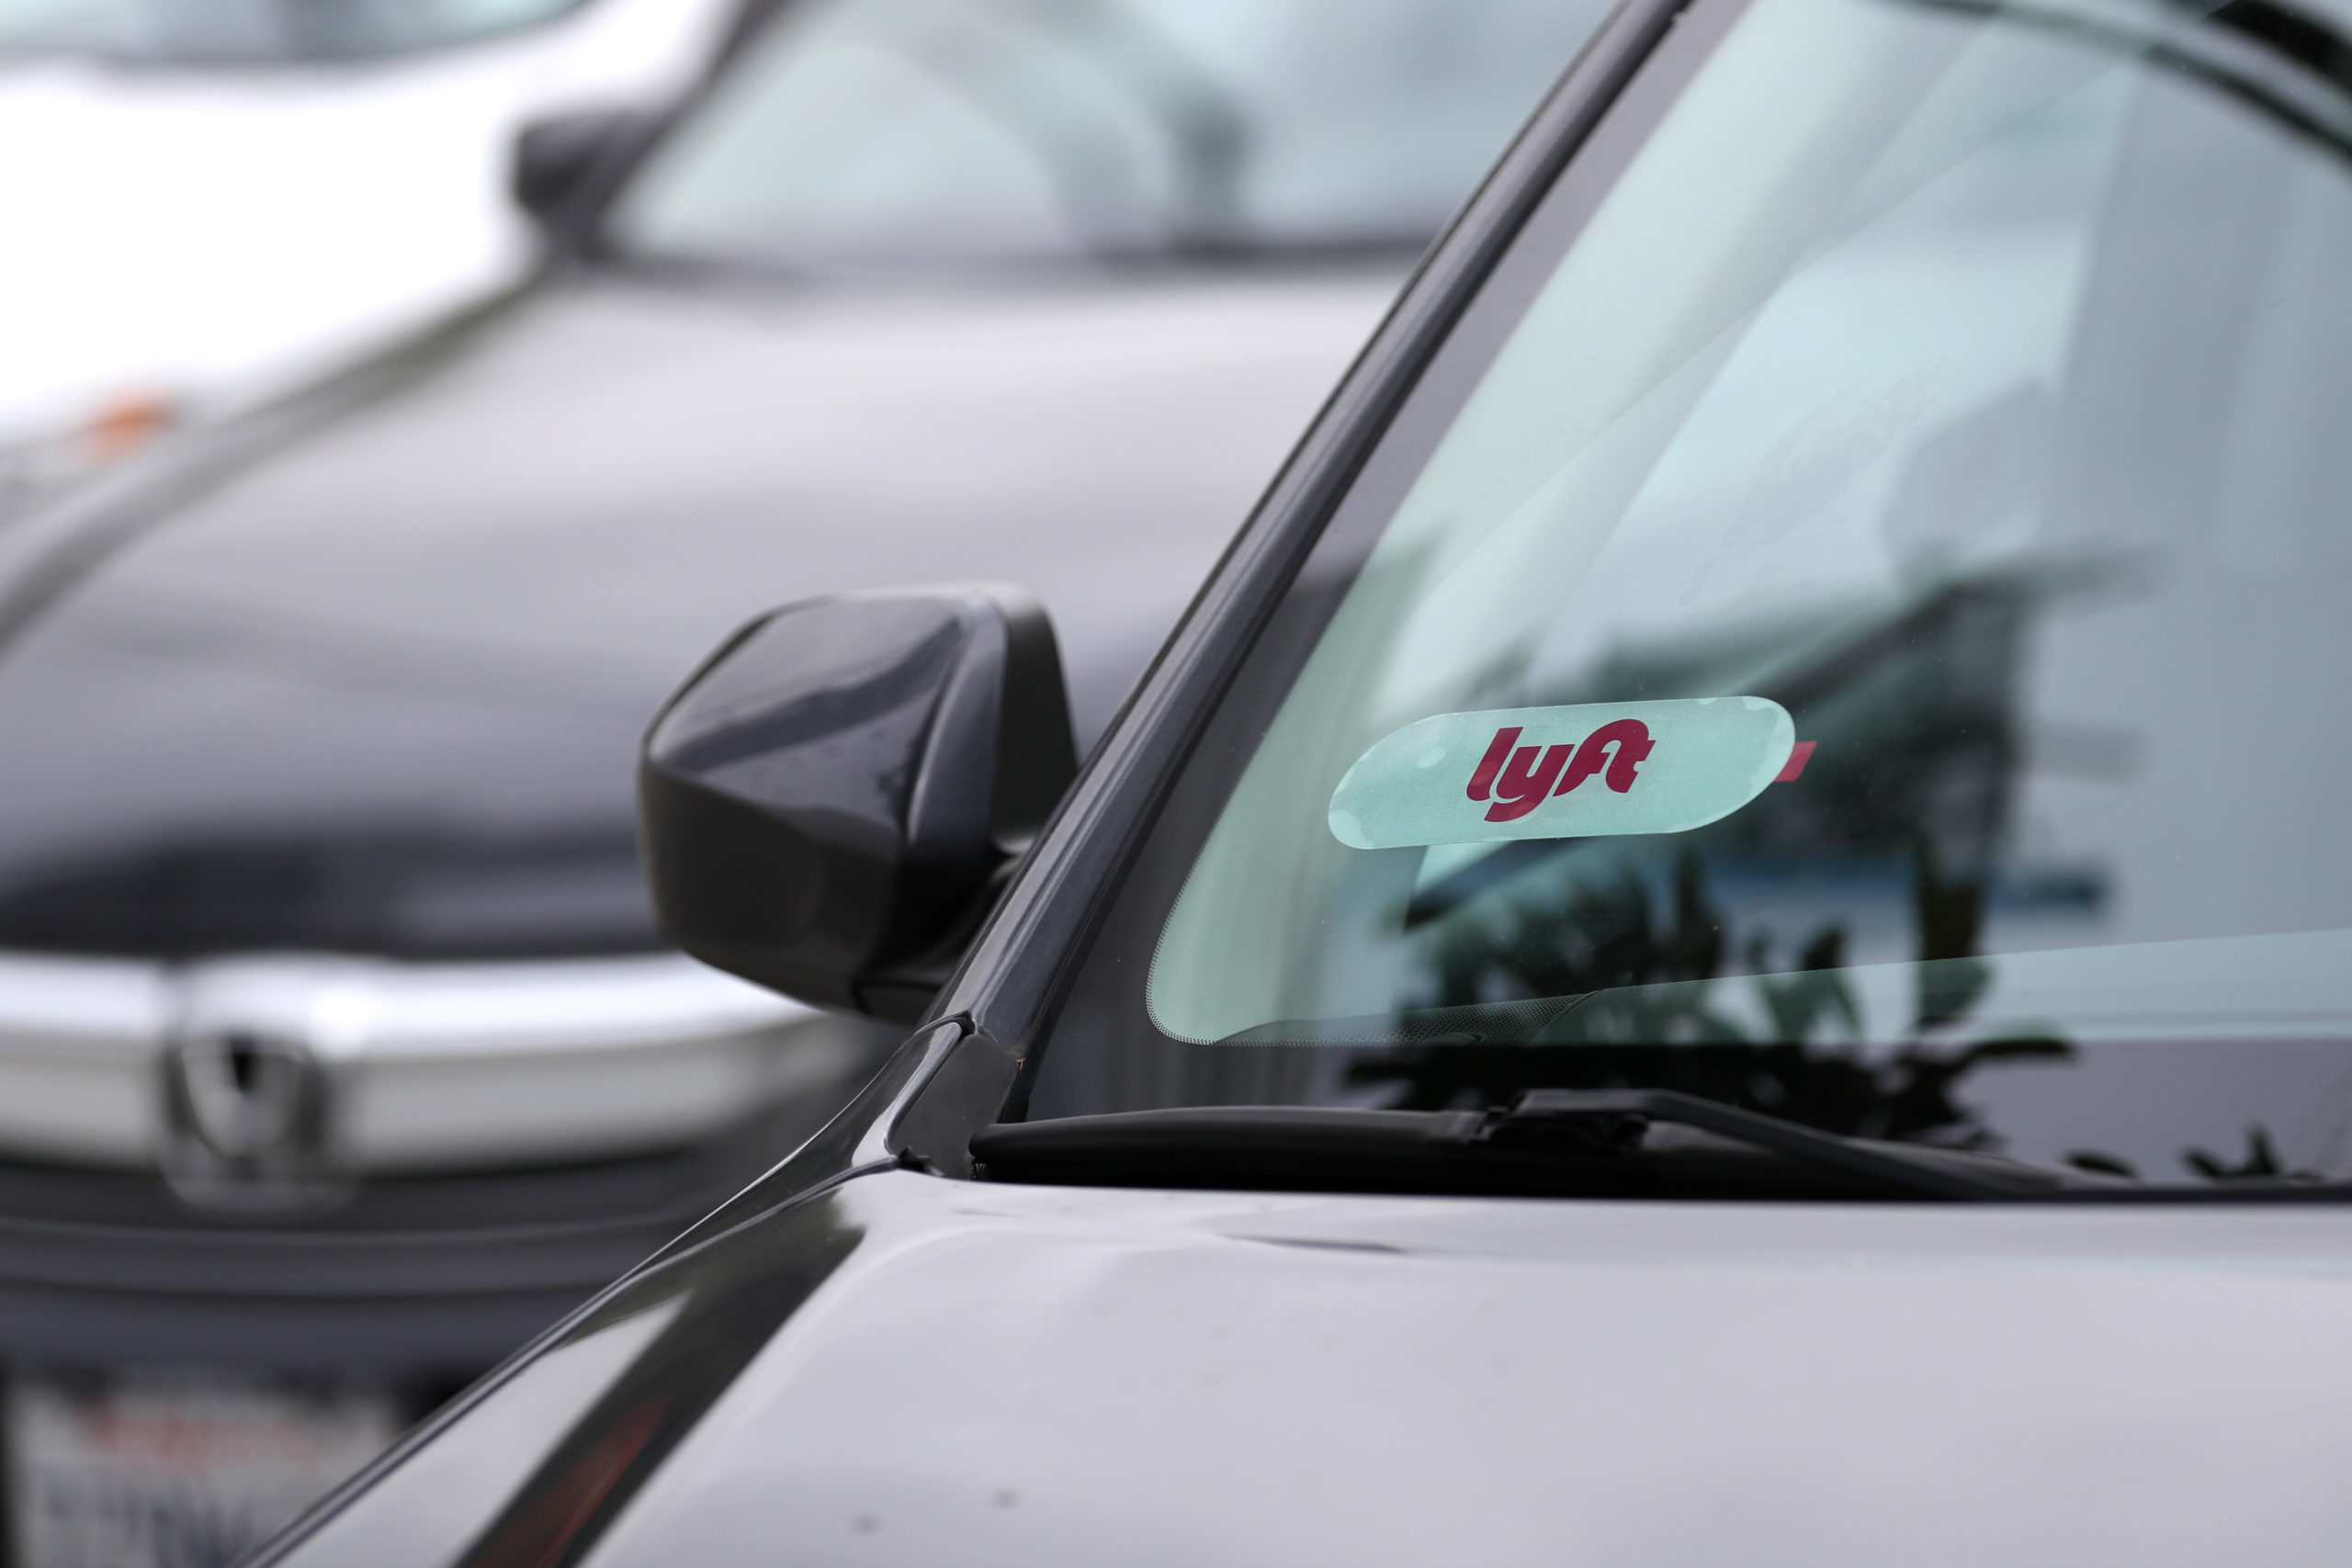 SAN FRANCISCO, CALIFORNIA - MARCH 7: The Lyft logo is displayed on a car on March 7, 2019 in San Fr...